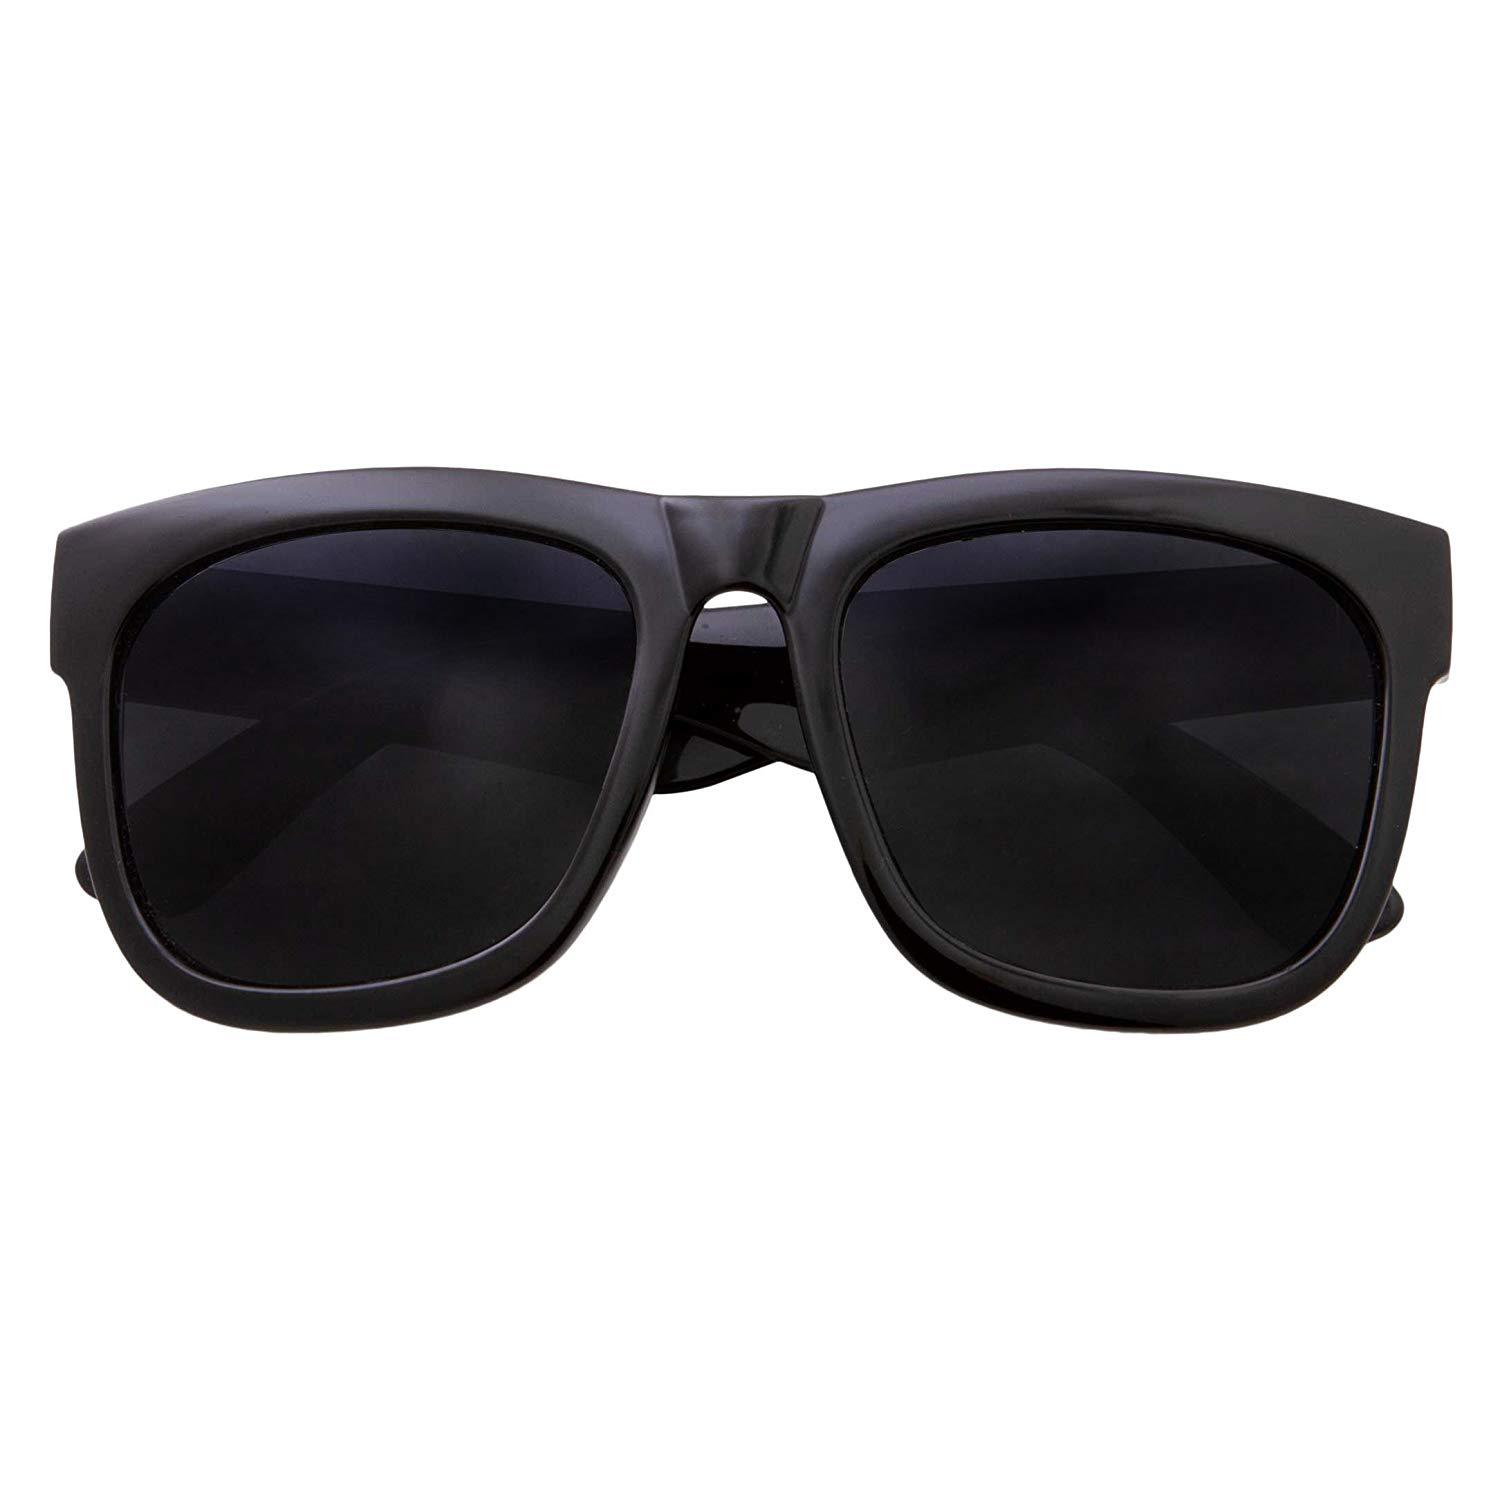 XL Men's Big Wide Frame Black Sunglasses - Oversized Thick Extra Large ...